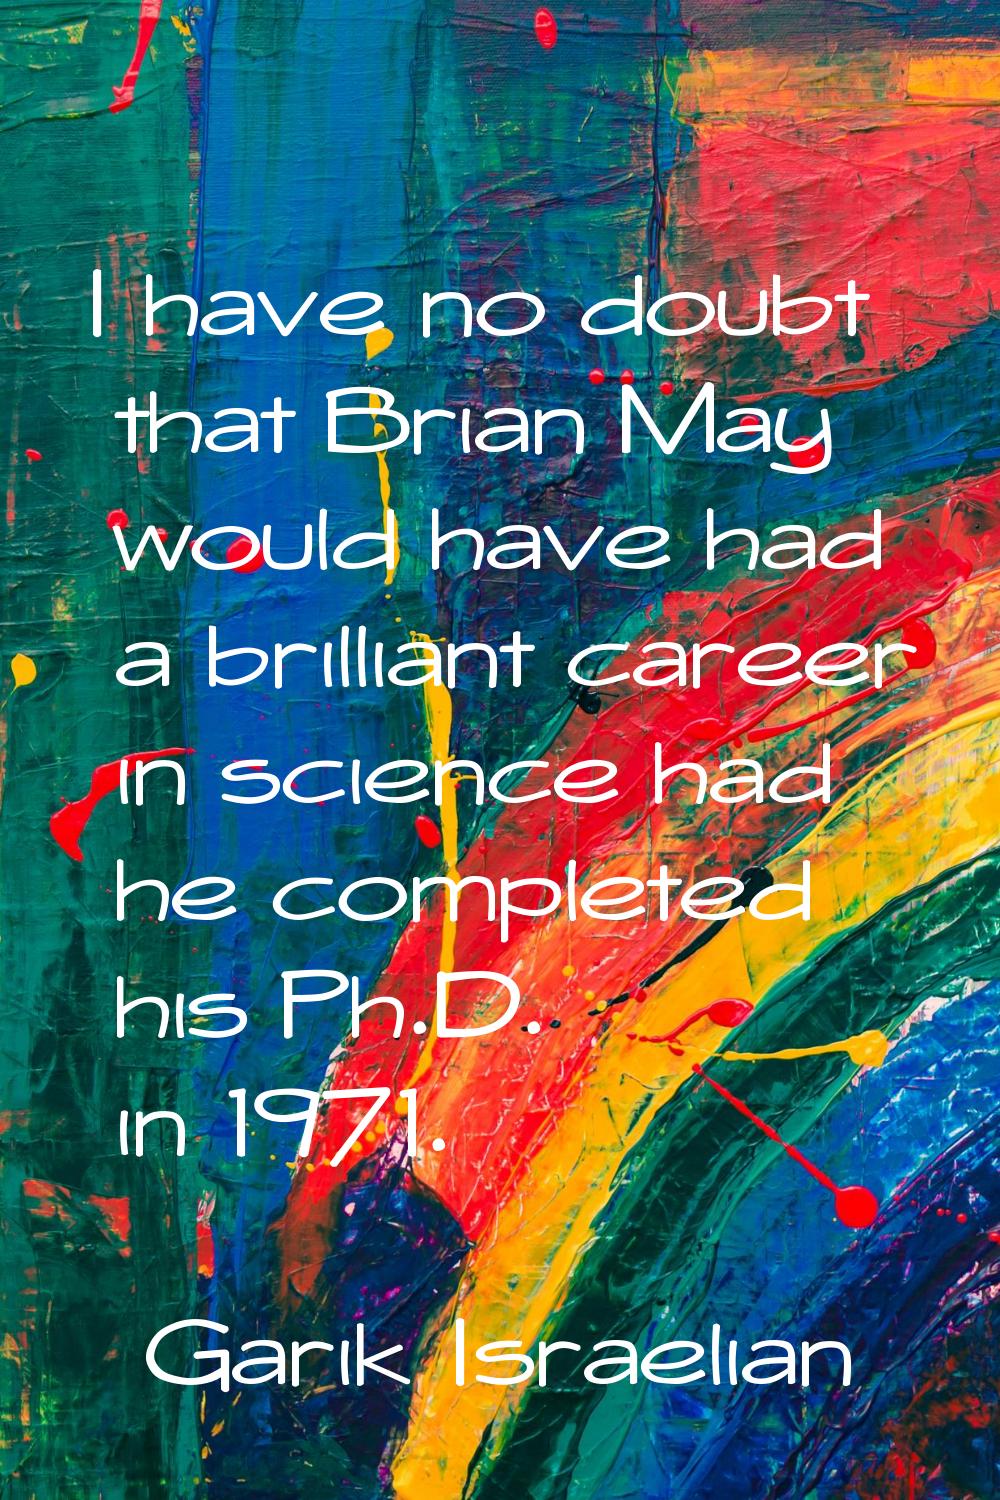 I have no doubt that Brian May would have had a brilliant career in science had he completed his Ph